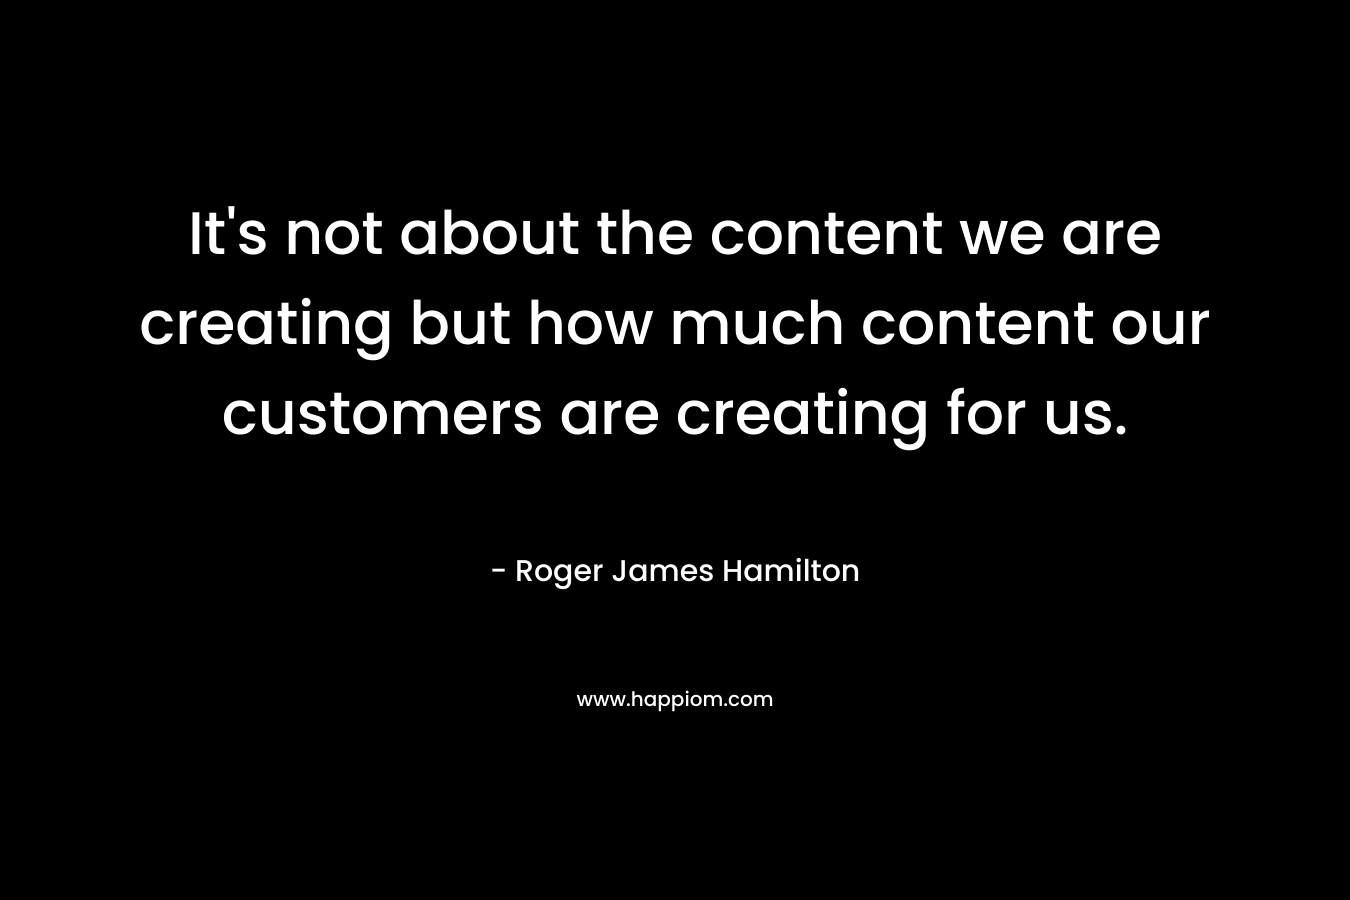 It's not about the content we are creating but how much content our customers are creating for us.